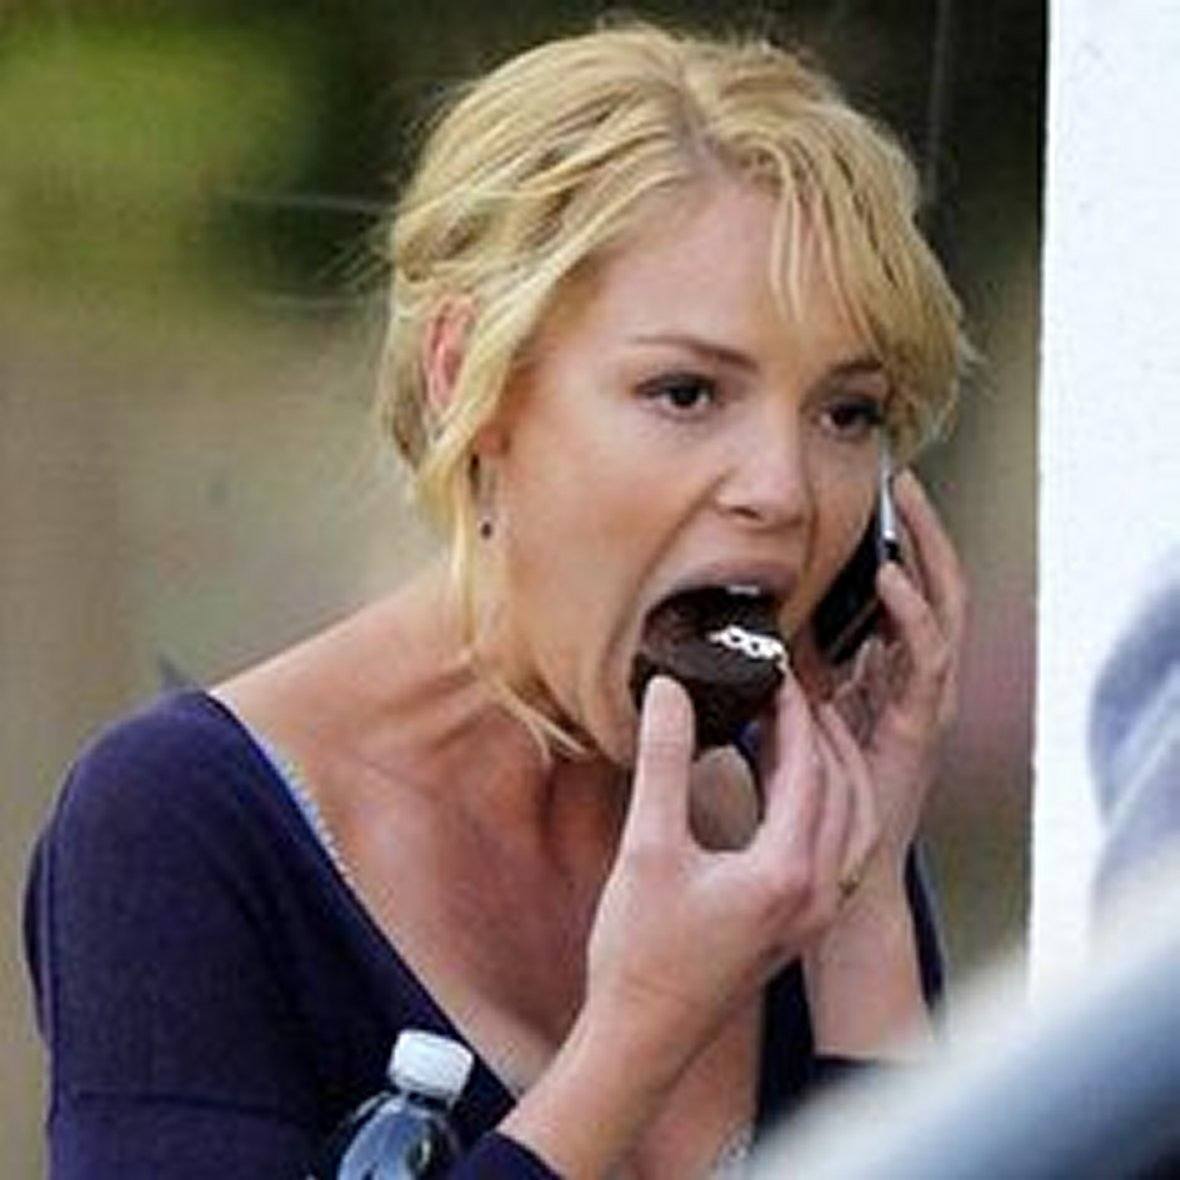 13 Celebrity Chocoholics Caught in the Act - Page 2 of 13 - Fame Focus